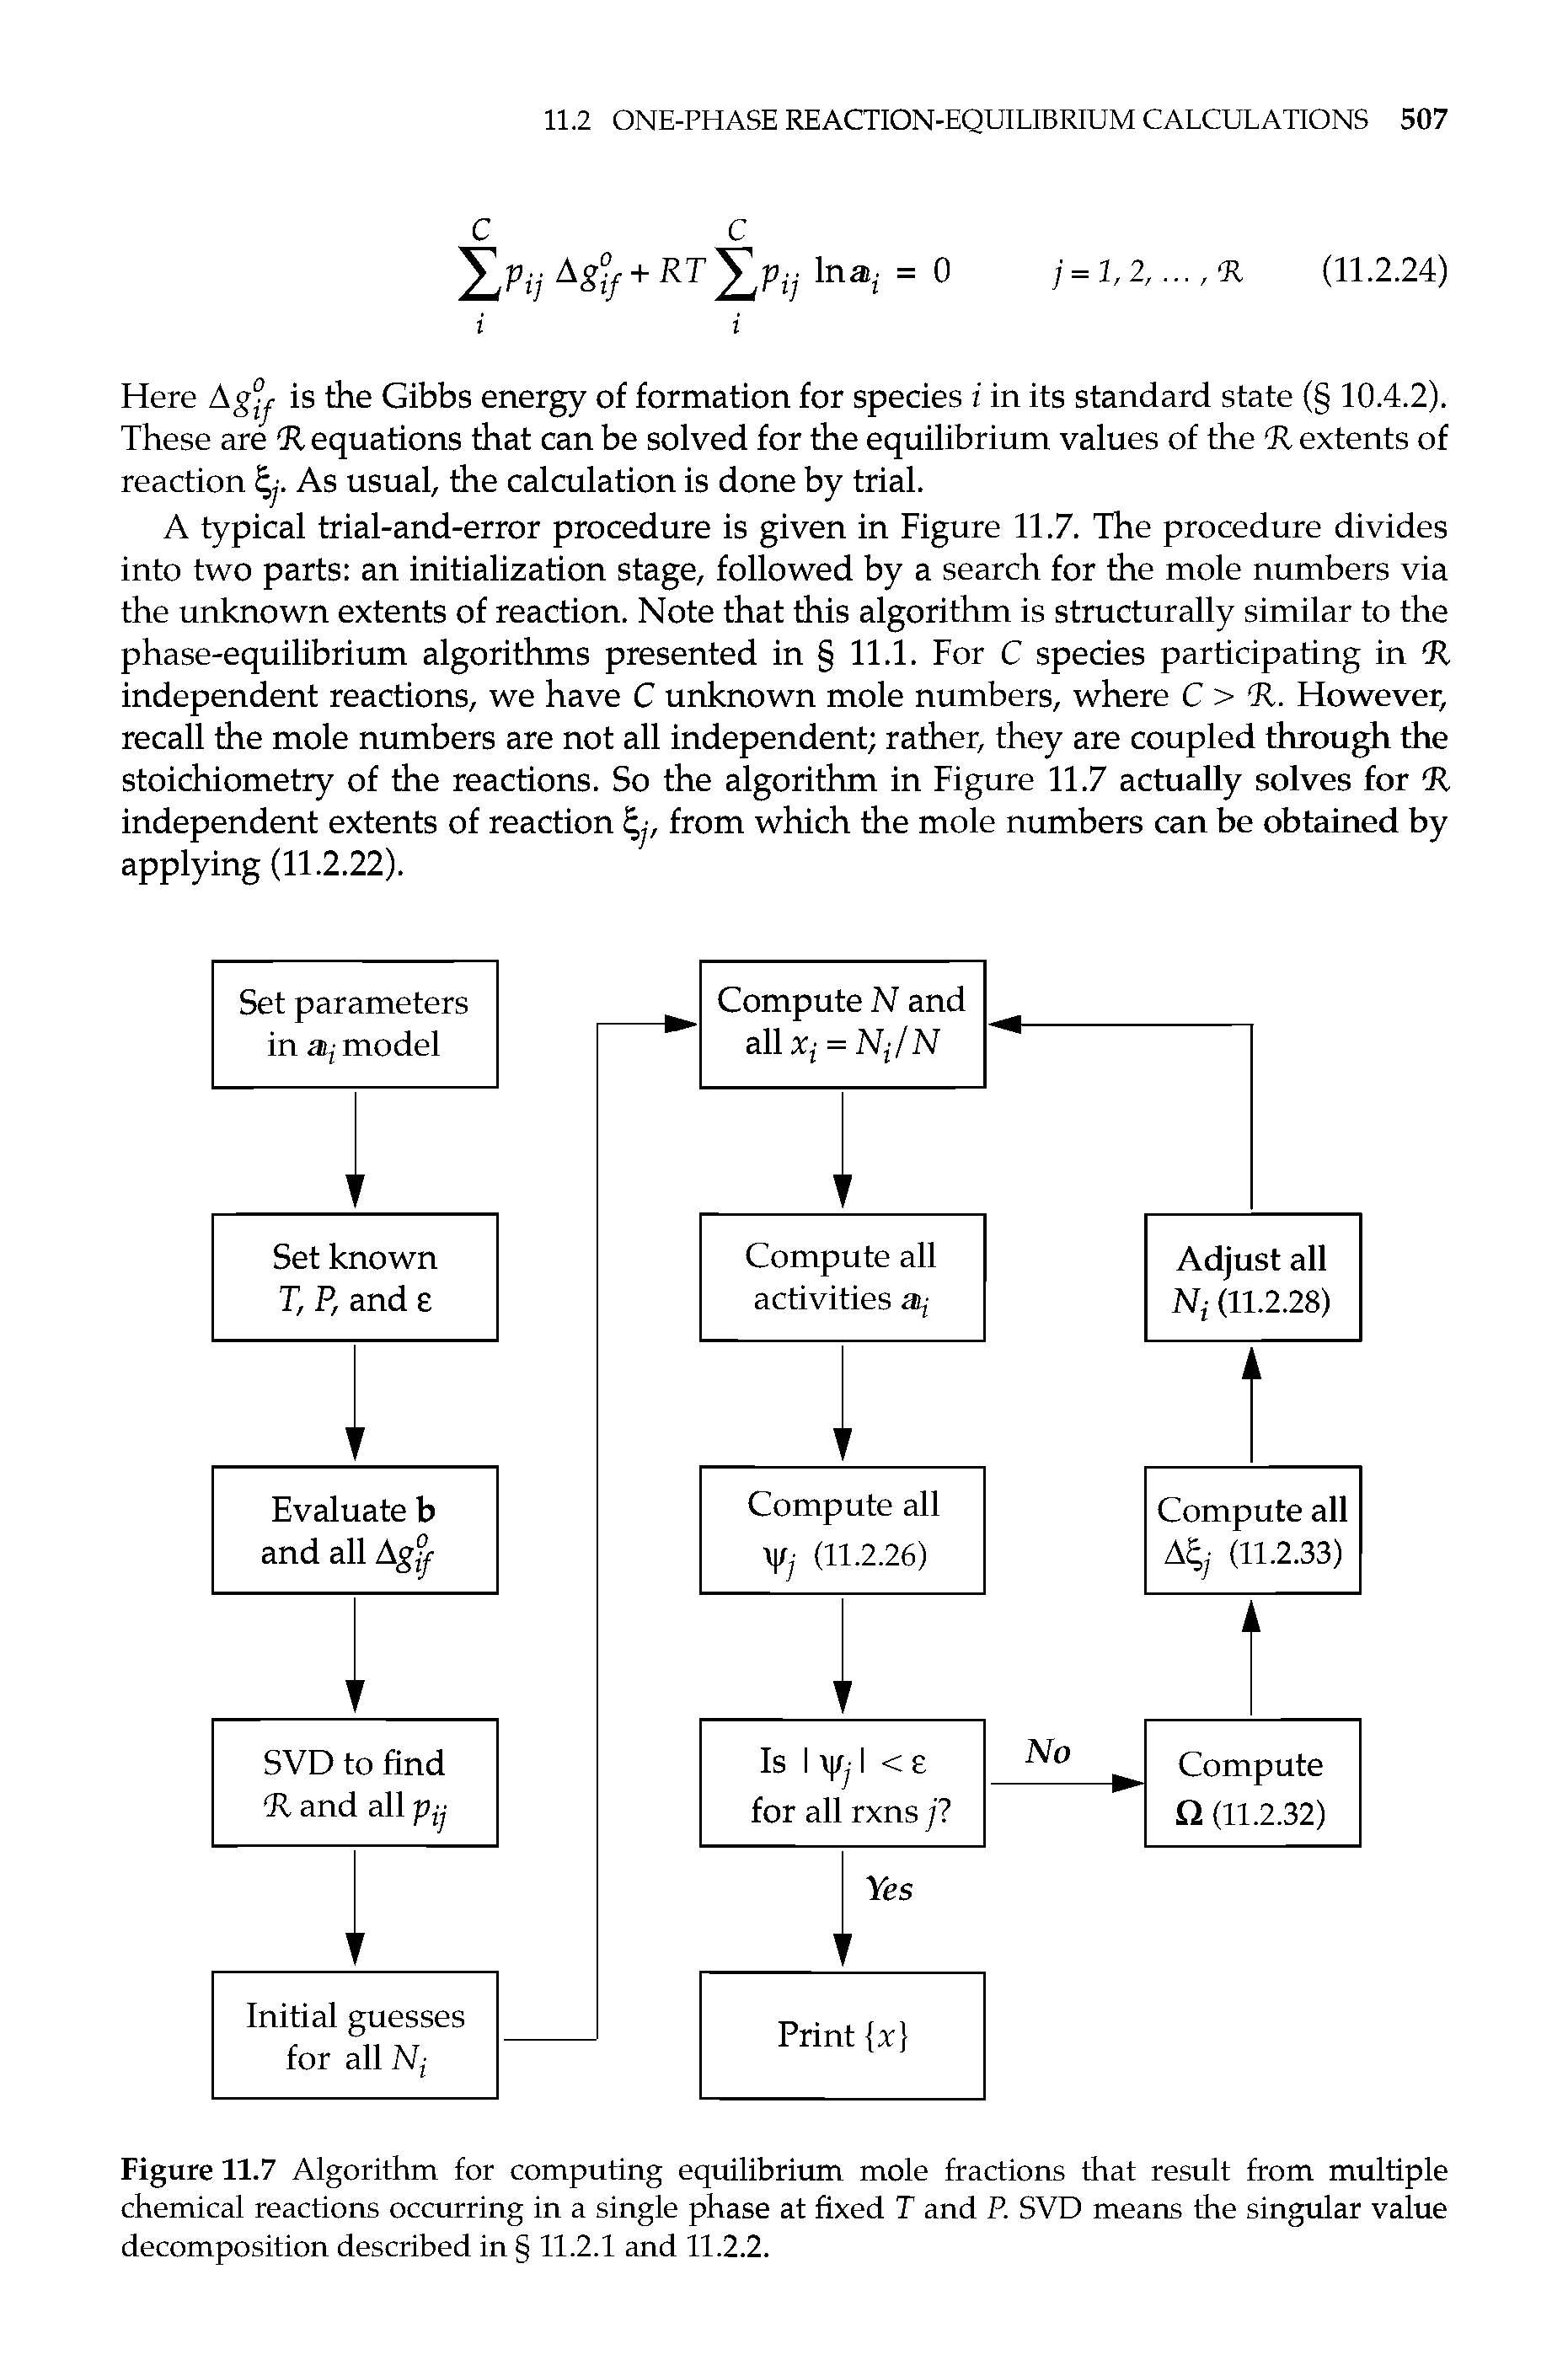 Figure 11.7 Algorithm for computing equilibrium mole fractions that result from multiple chemical reactions occurring in a single phase at fixed T and P. SVD means the singular value decomposition described in 11.2.1 and 11.2.2.